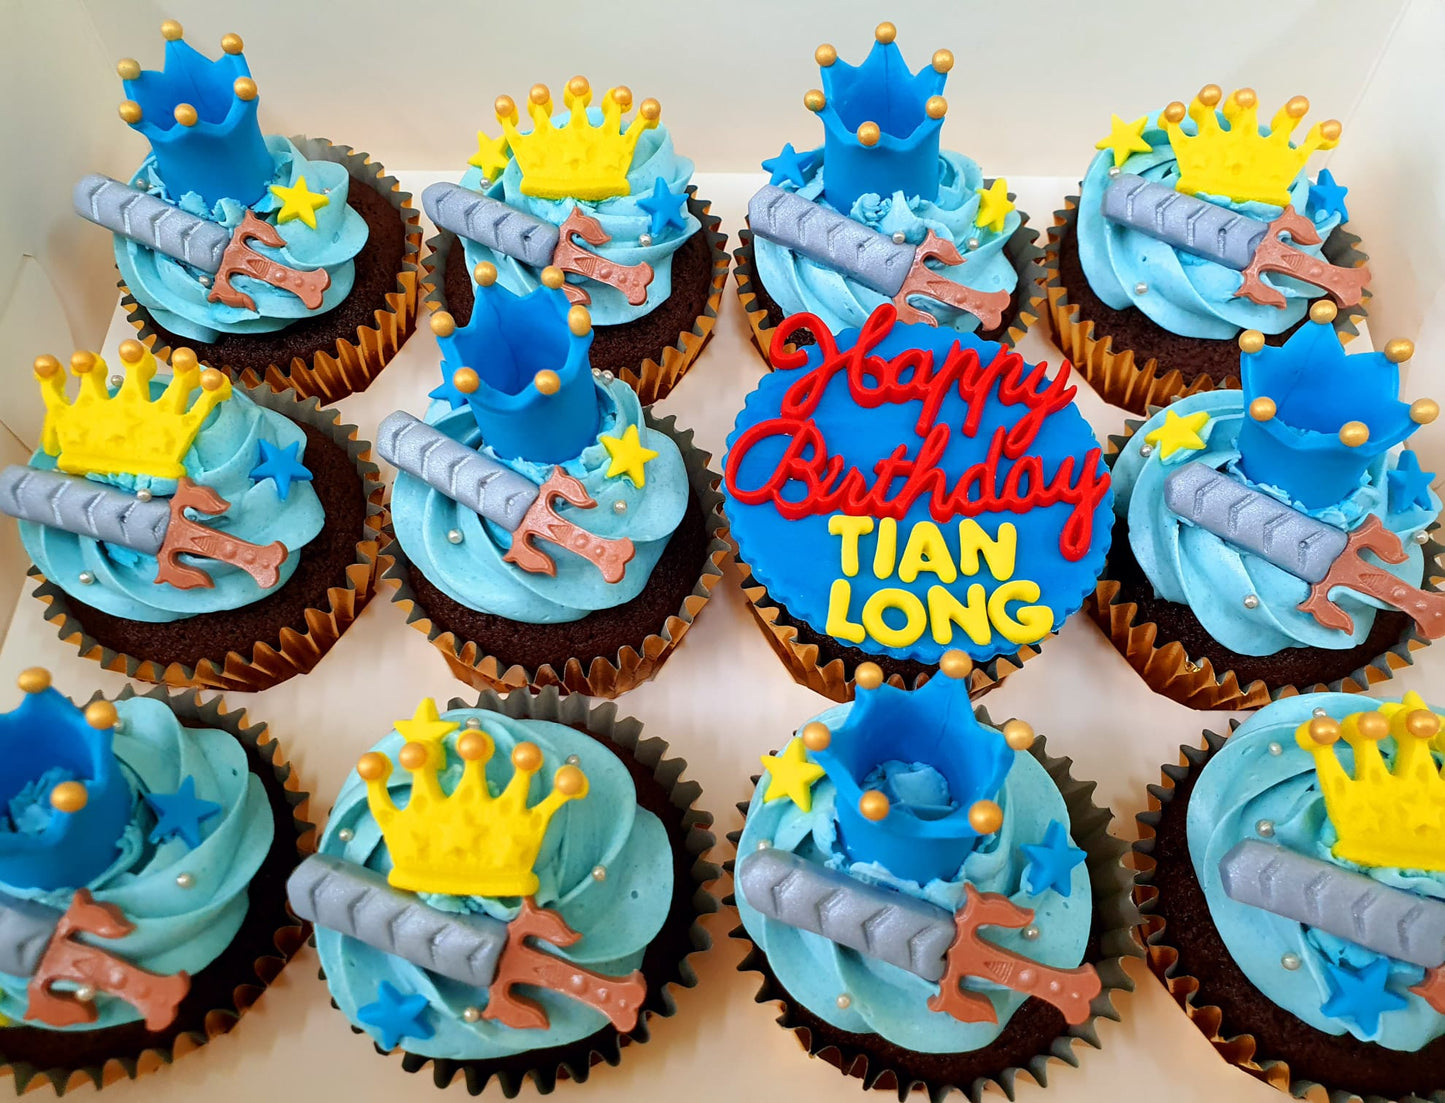 Little Prince Cupcakes (Box of 12)